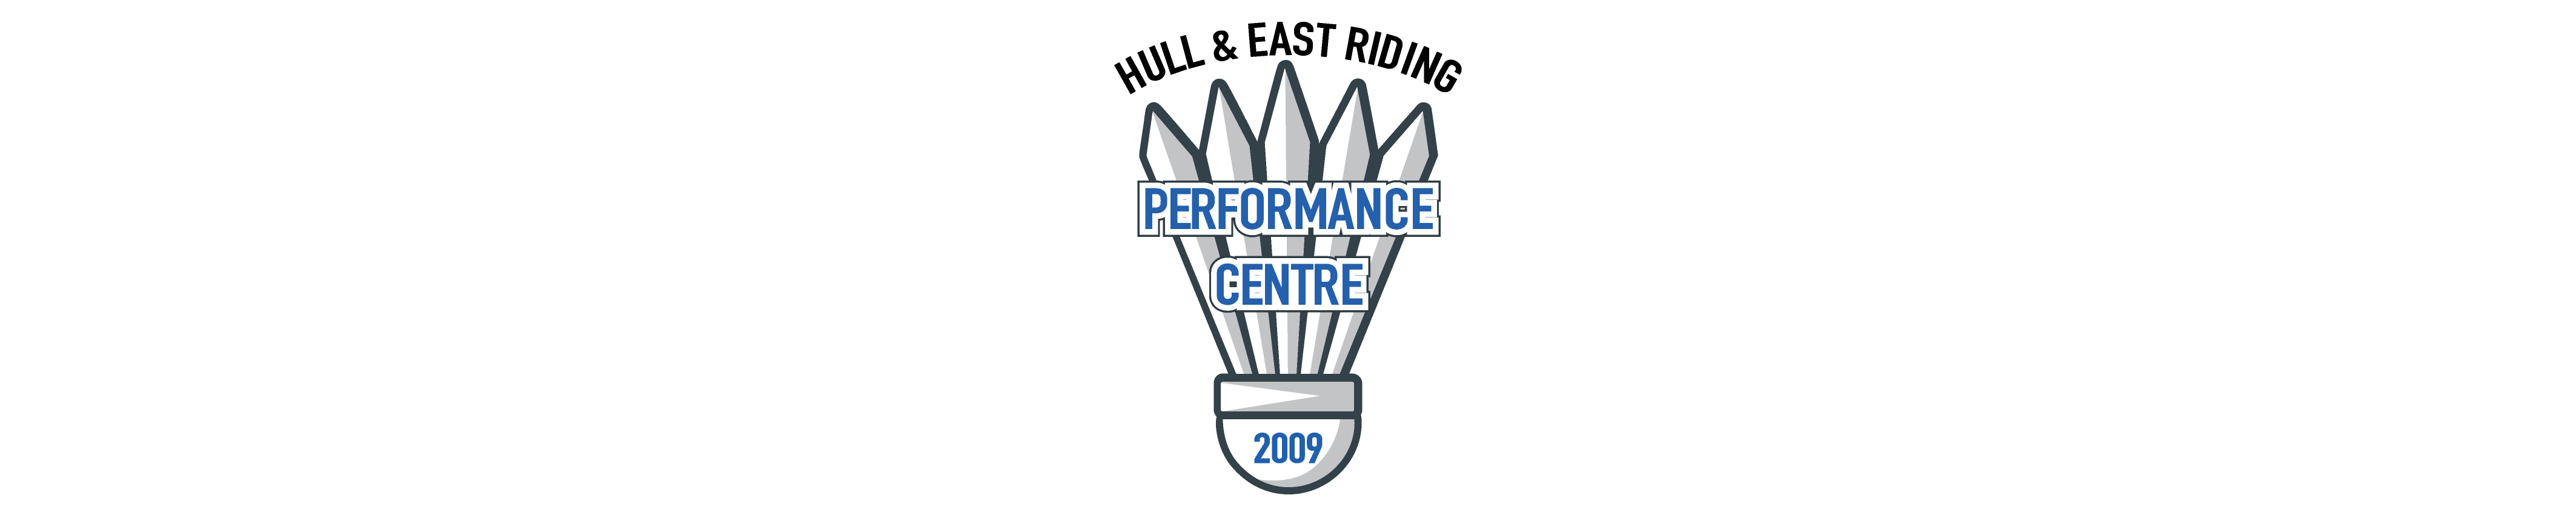 Hull & East Riding Performance Centre